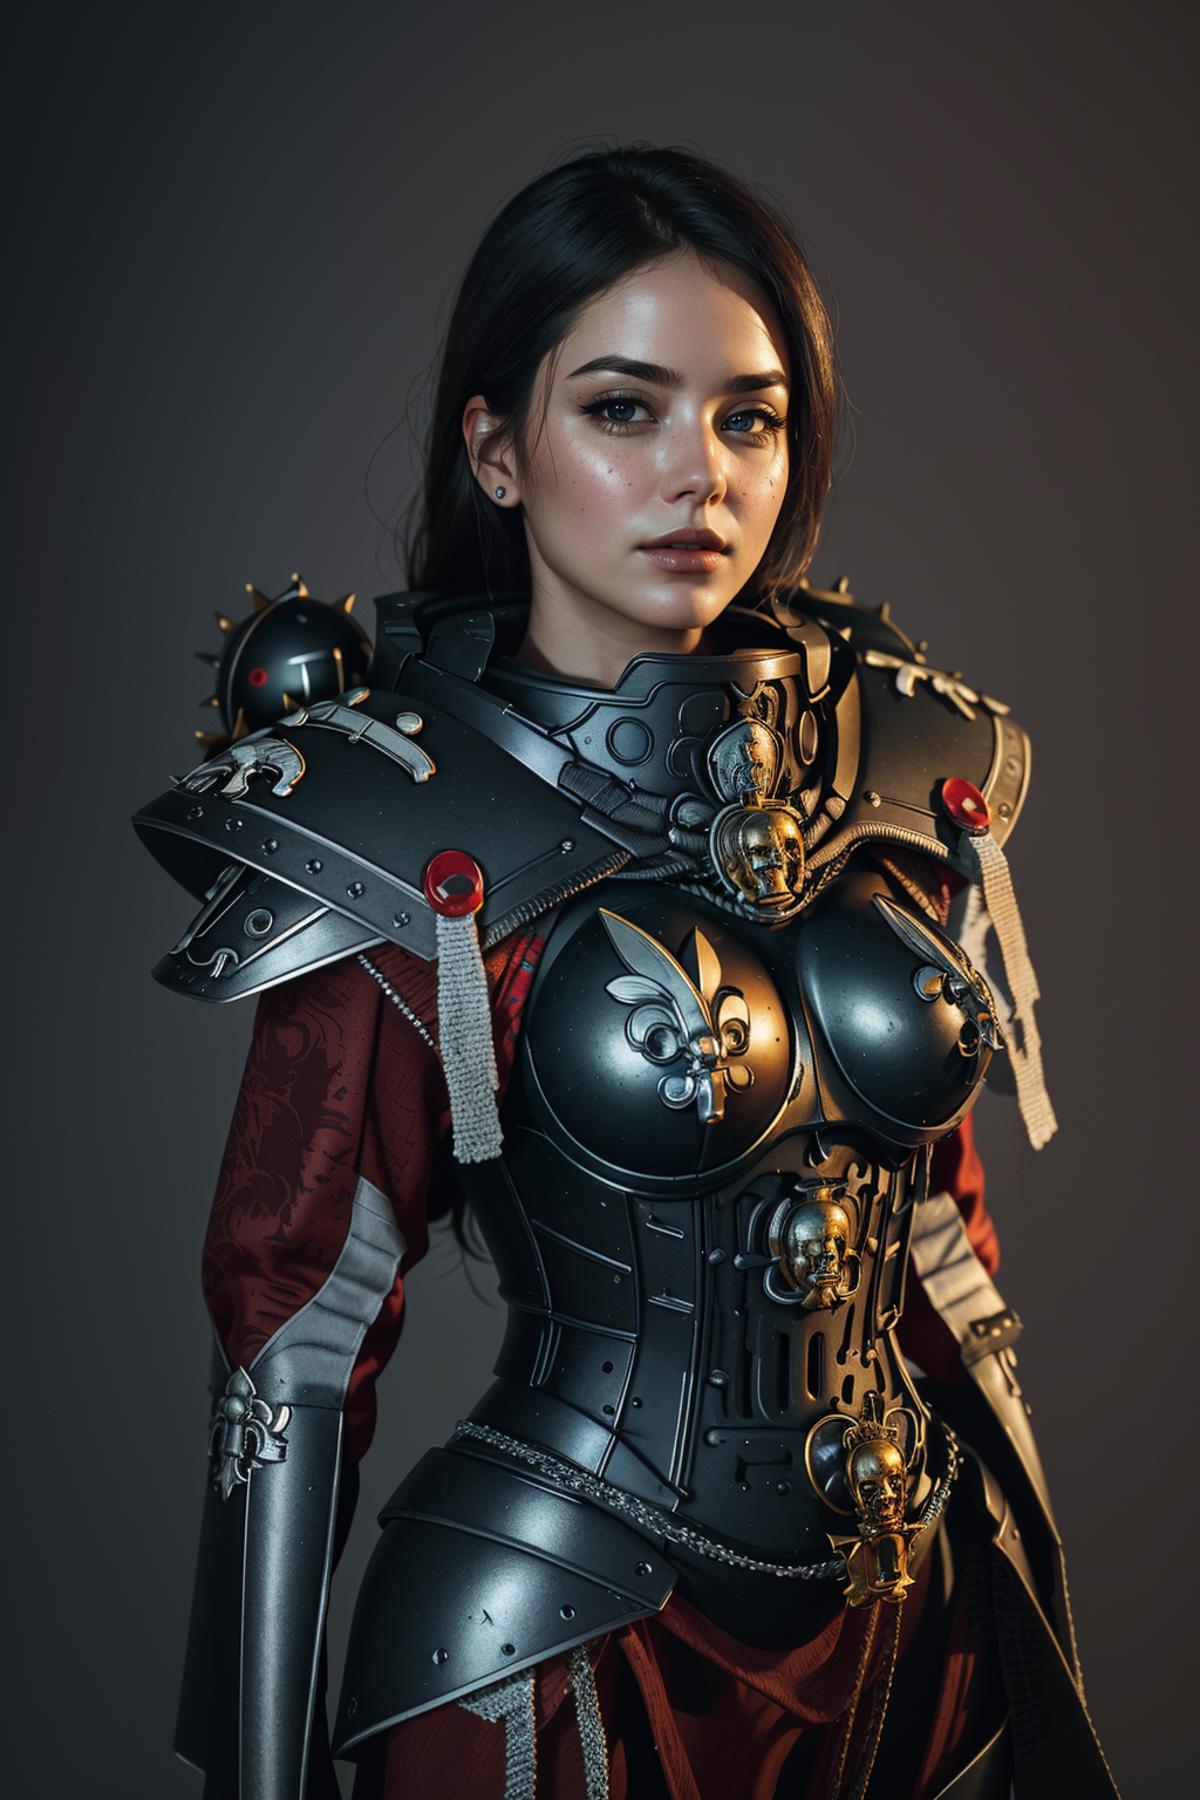 A woman wearing a medieval armor and a red and white jacket.